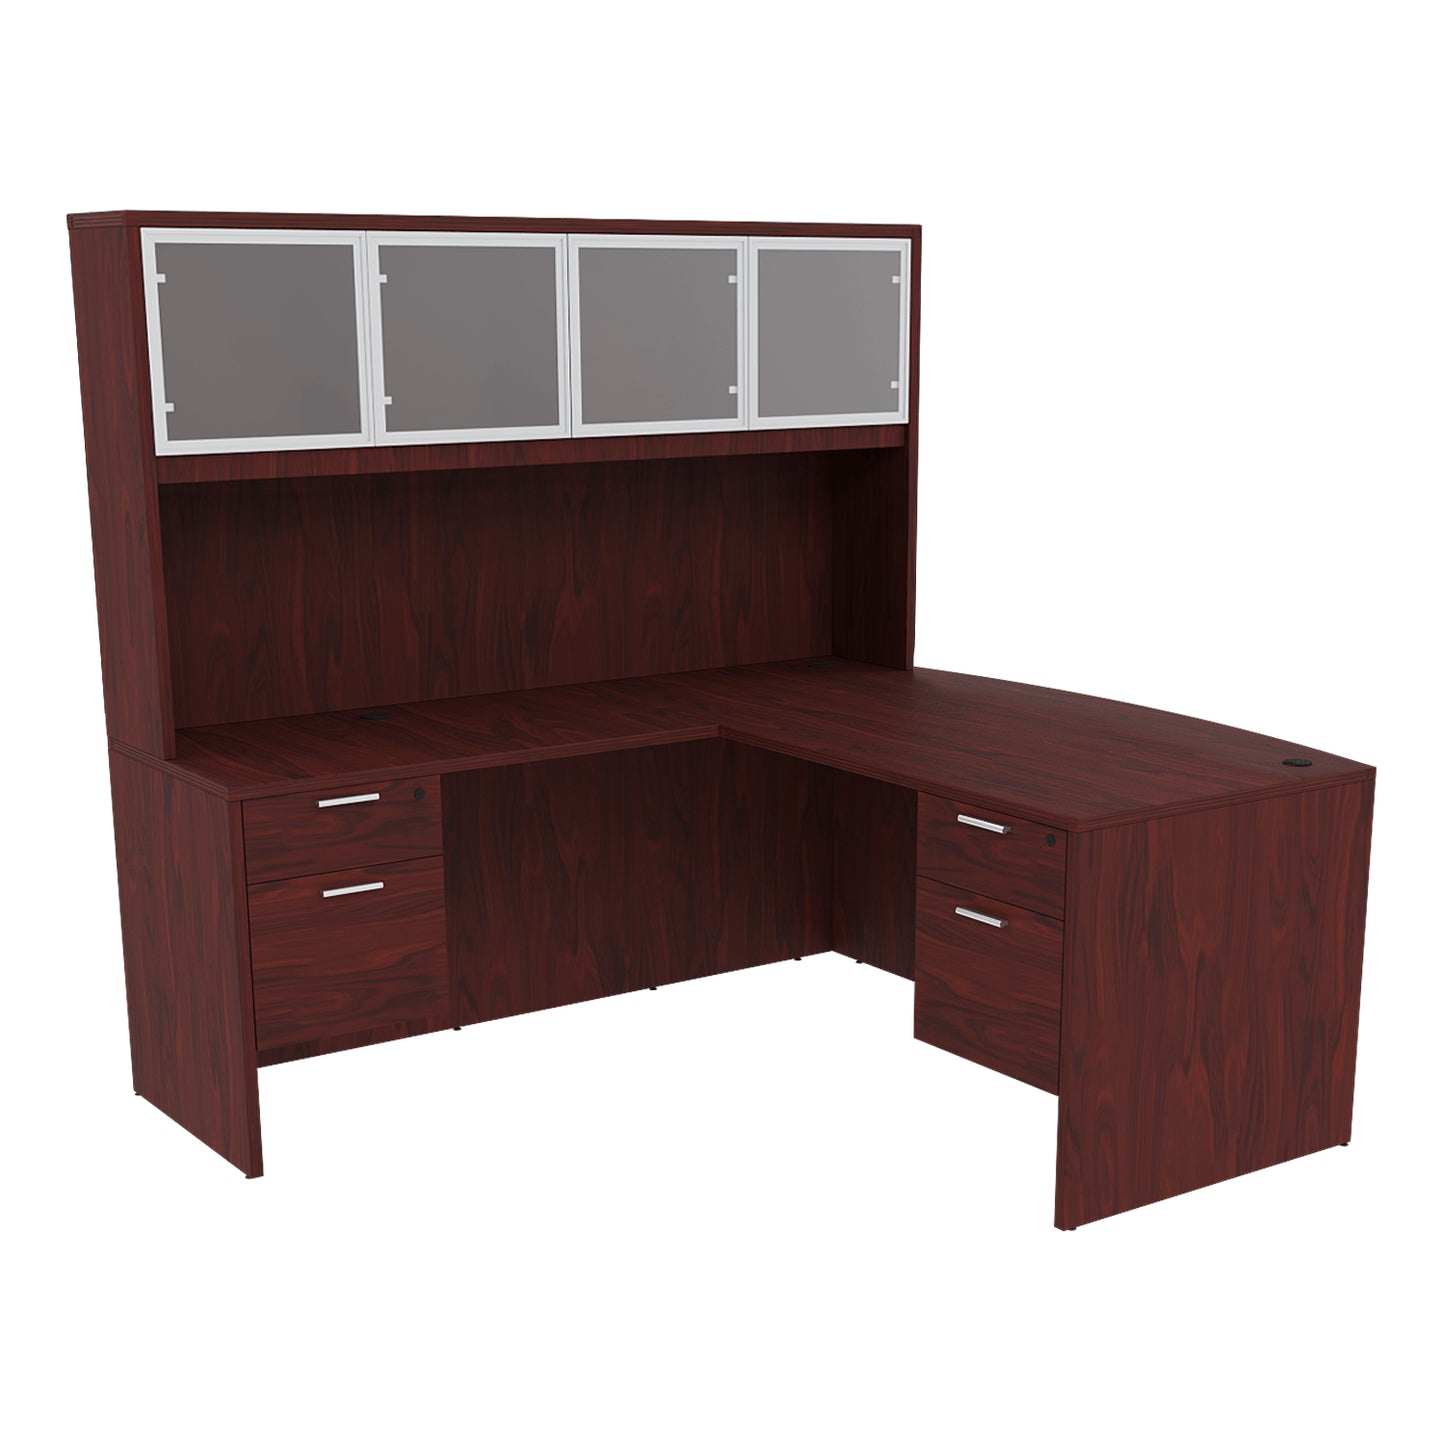 Kai L-Shaped Bow Front Desk with Double Suspended Pedestals & 4 Door Hutch